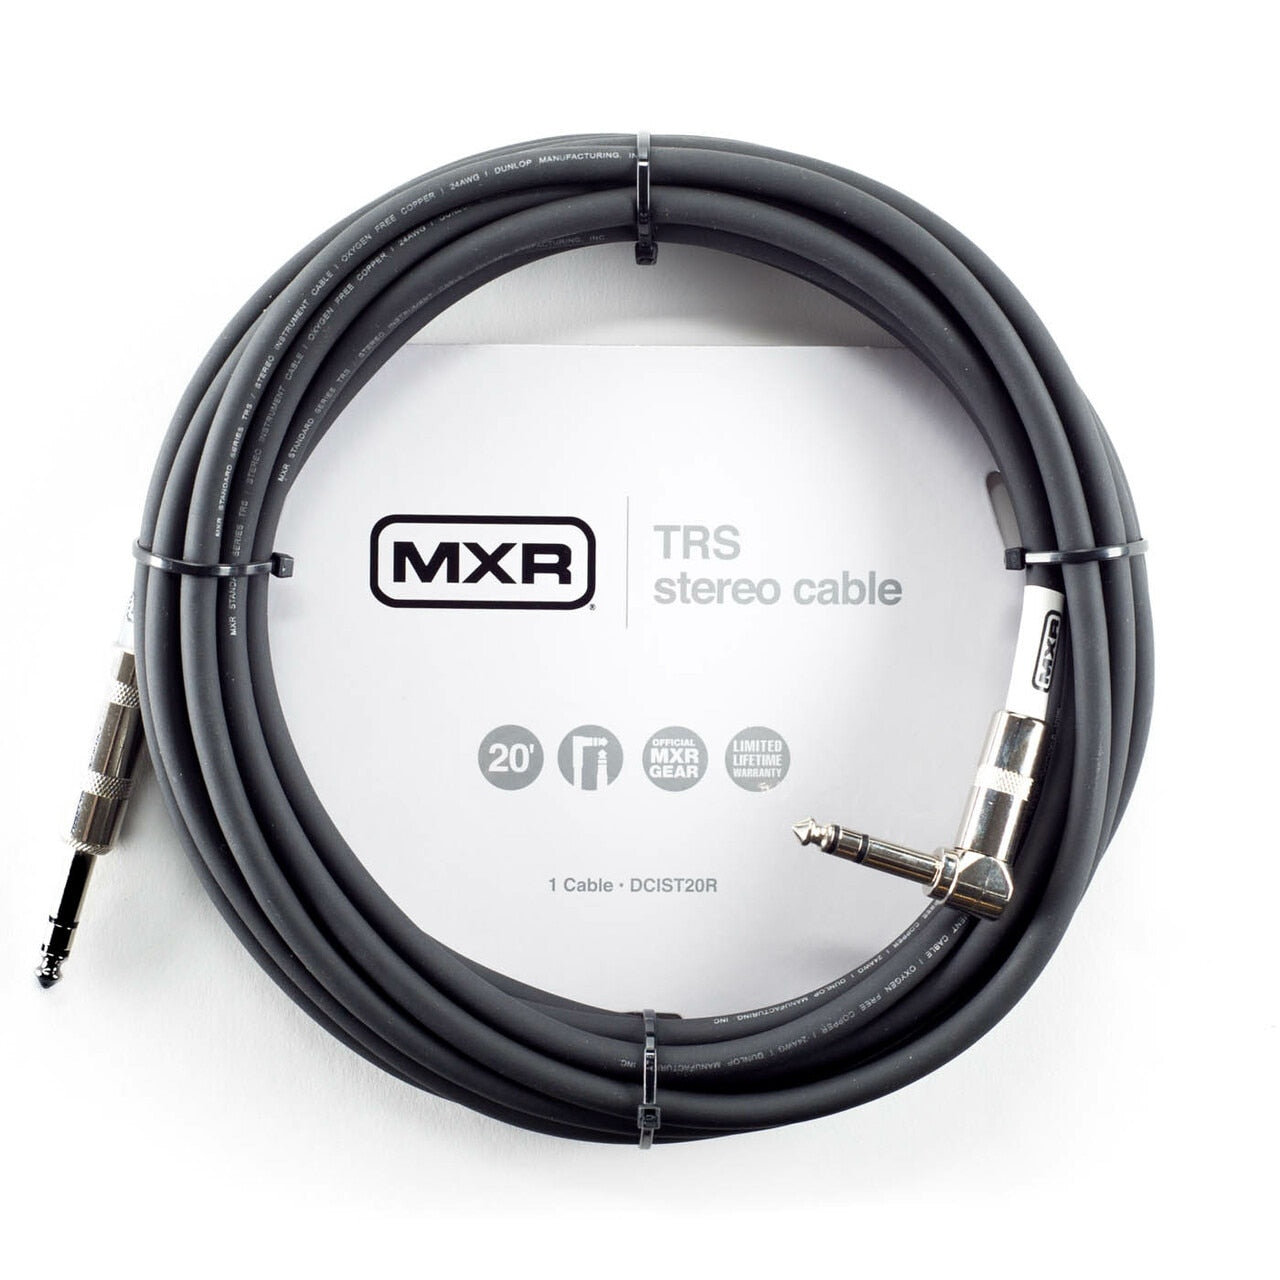 Dunlop MXR® 20FT TRS Stereo Cable - Right / Straight (DCIST20R)